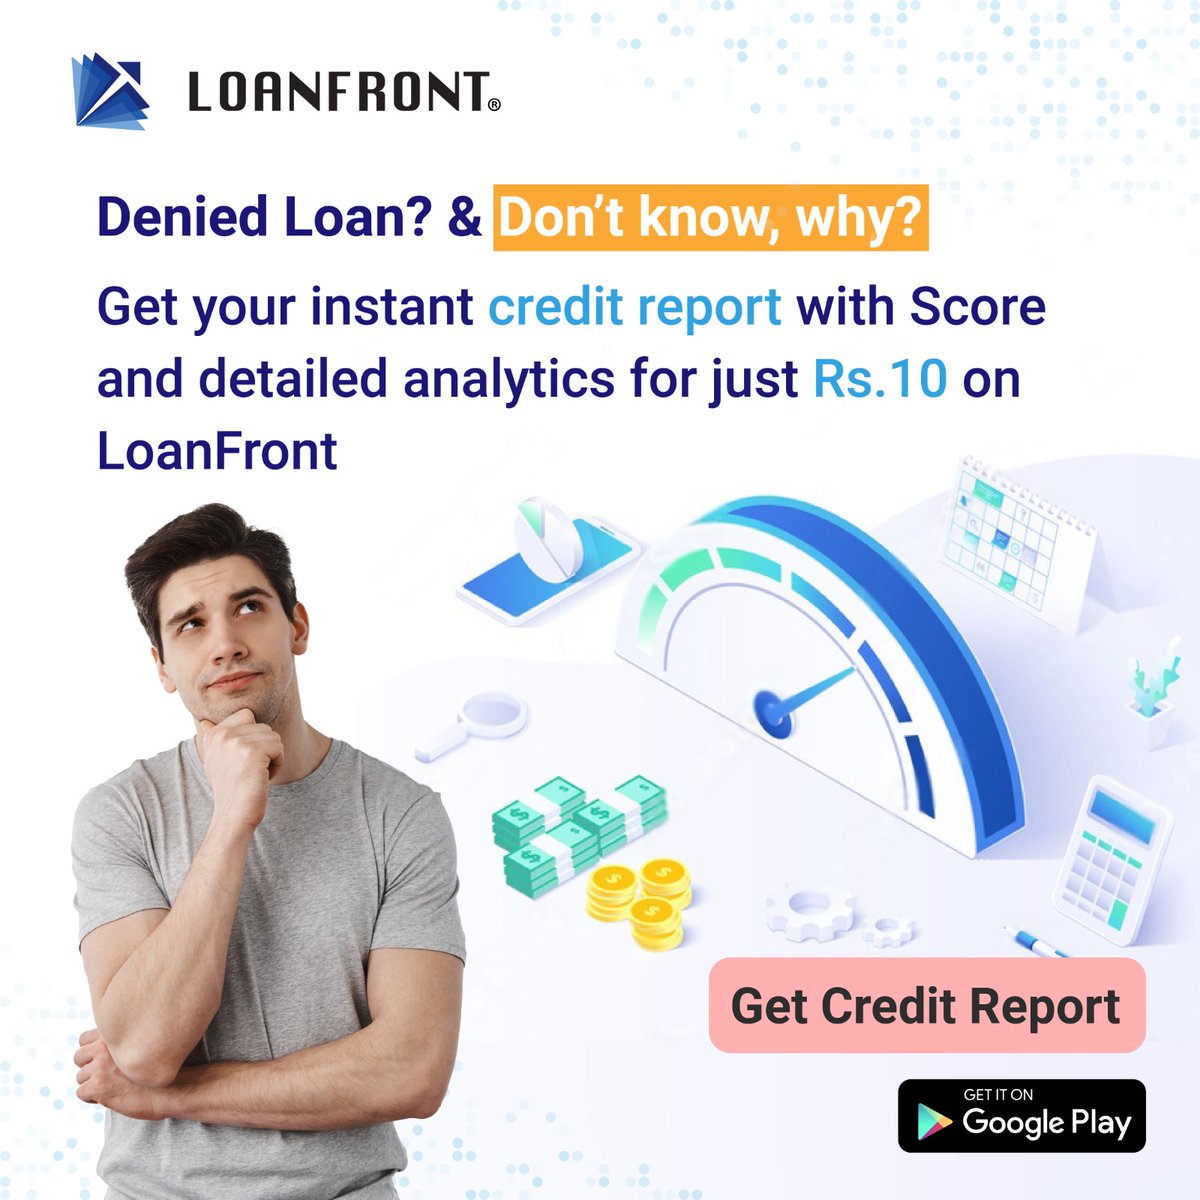 Gain insight into your financial health and pave the way to brighter possibilities. Check your Credit Score with Loanfront Today! 💳 ✔
#LoanFront #CreditScore #Loans #Personalloans #Financialservices #CreditHealth #FinancialWellness #FinancialEmpowerment #SmartFinance